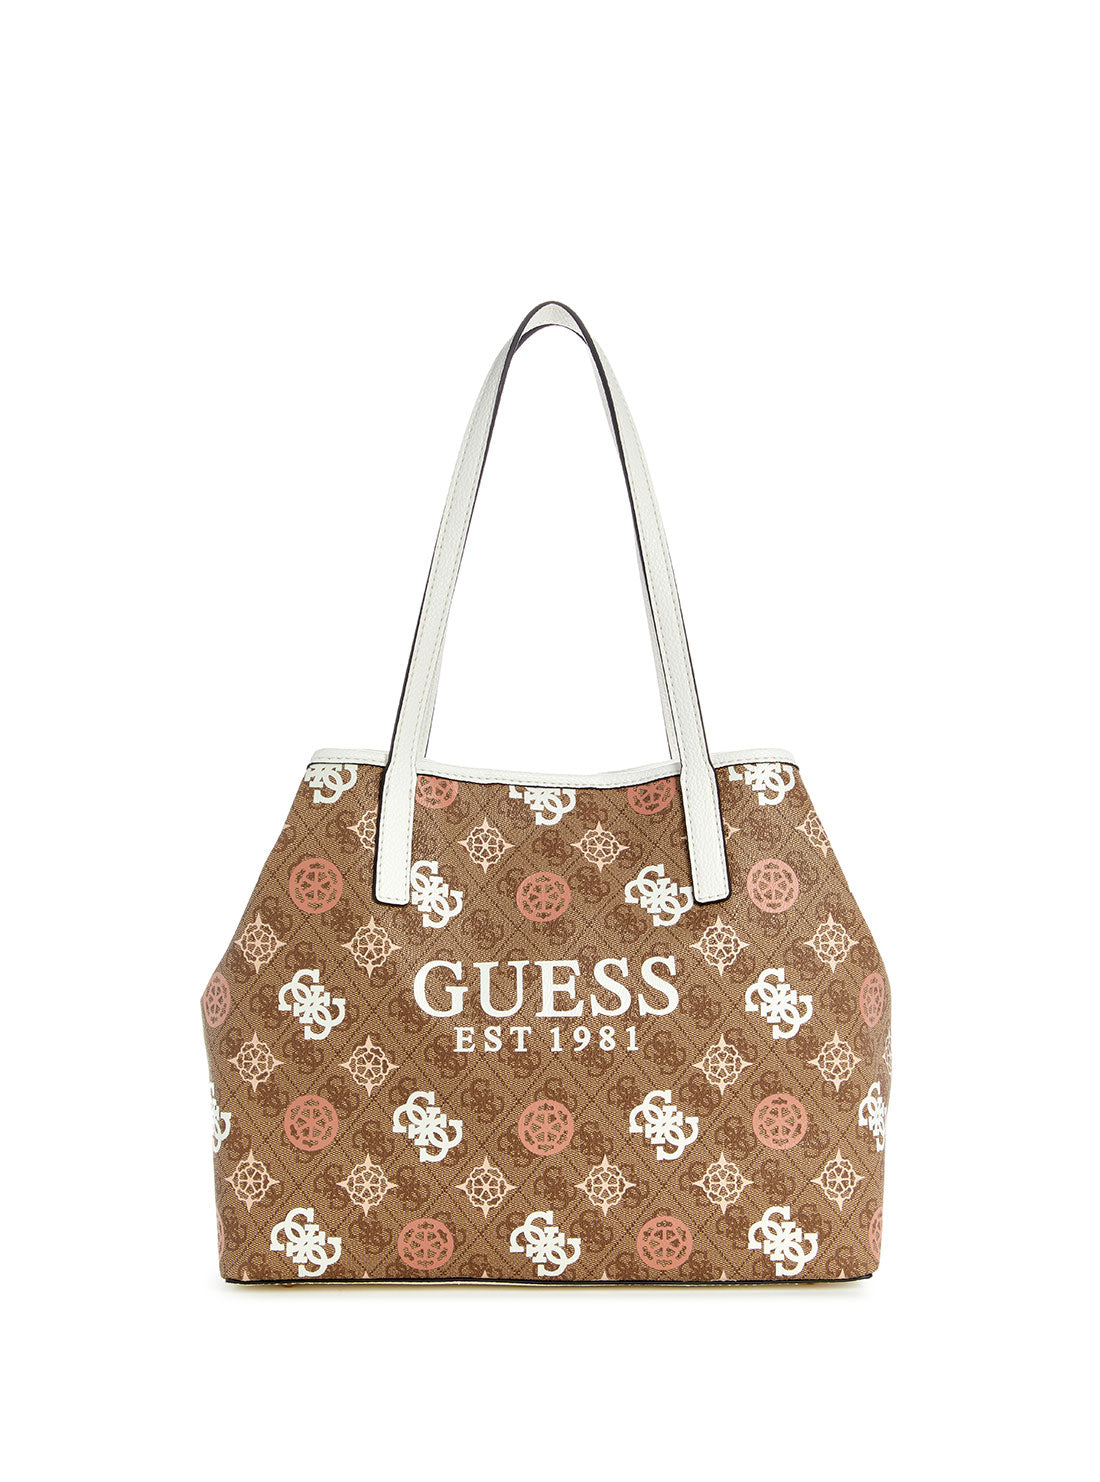 GUESS Beige Tan Logo Vikky 2 in 1 Tote Bag front view 